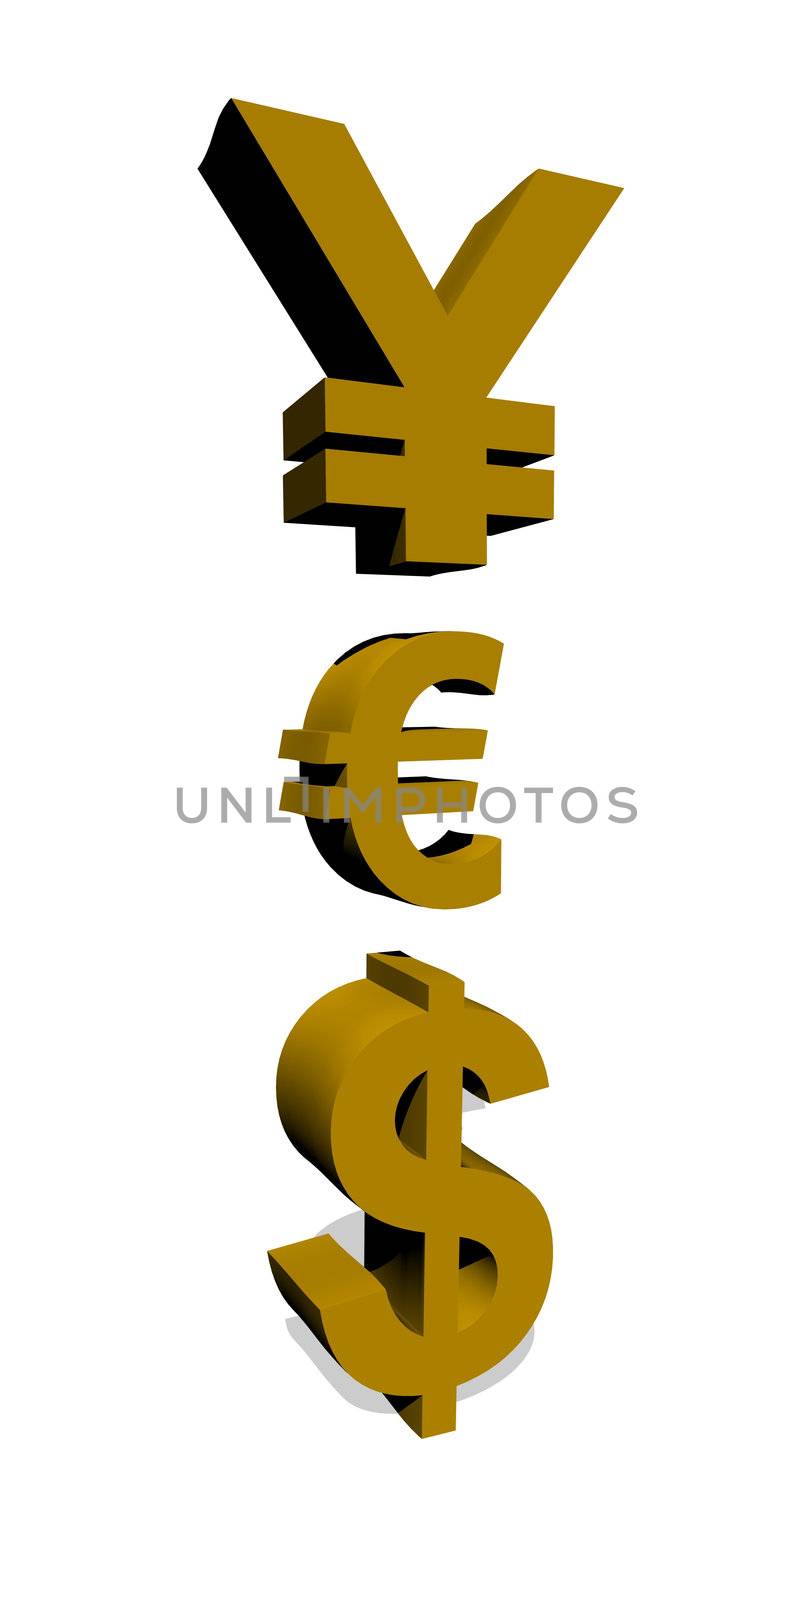 Vertically aligned symbols for yen, euro and dollar currencies in white background